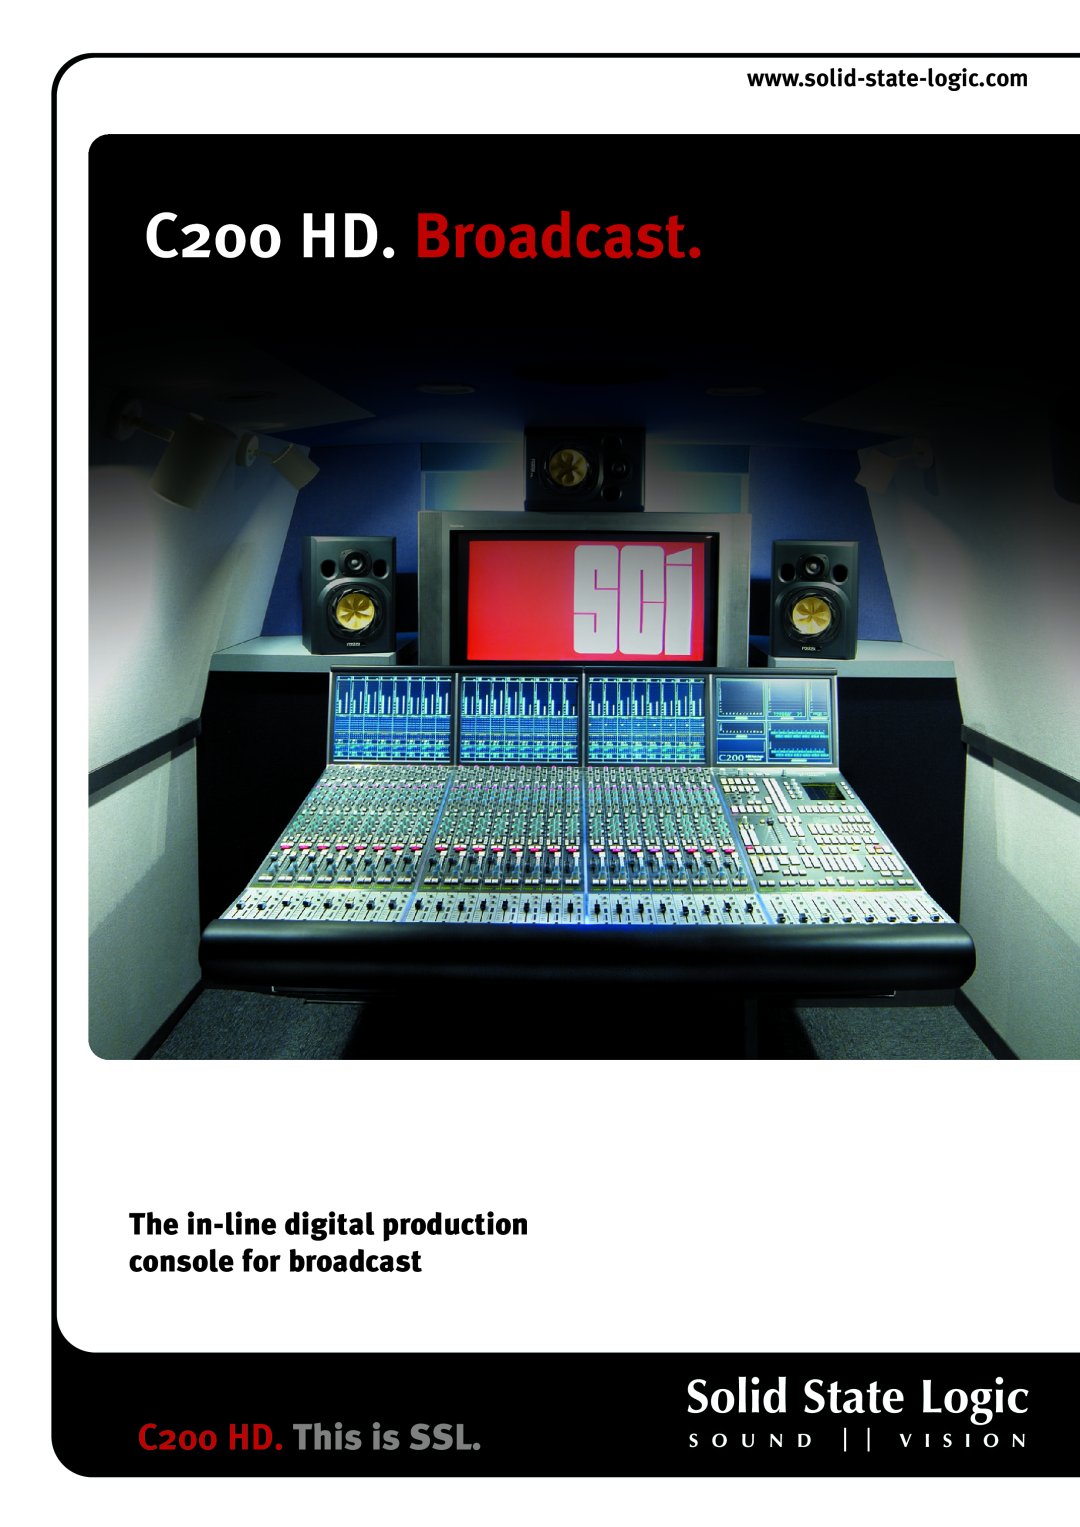 Solid State Logic manual C200 HD. This is SSL, C200 HD. Broadcast, The in-line digital production console for broadcast 